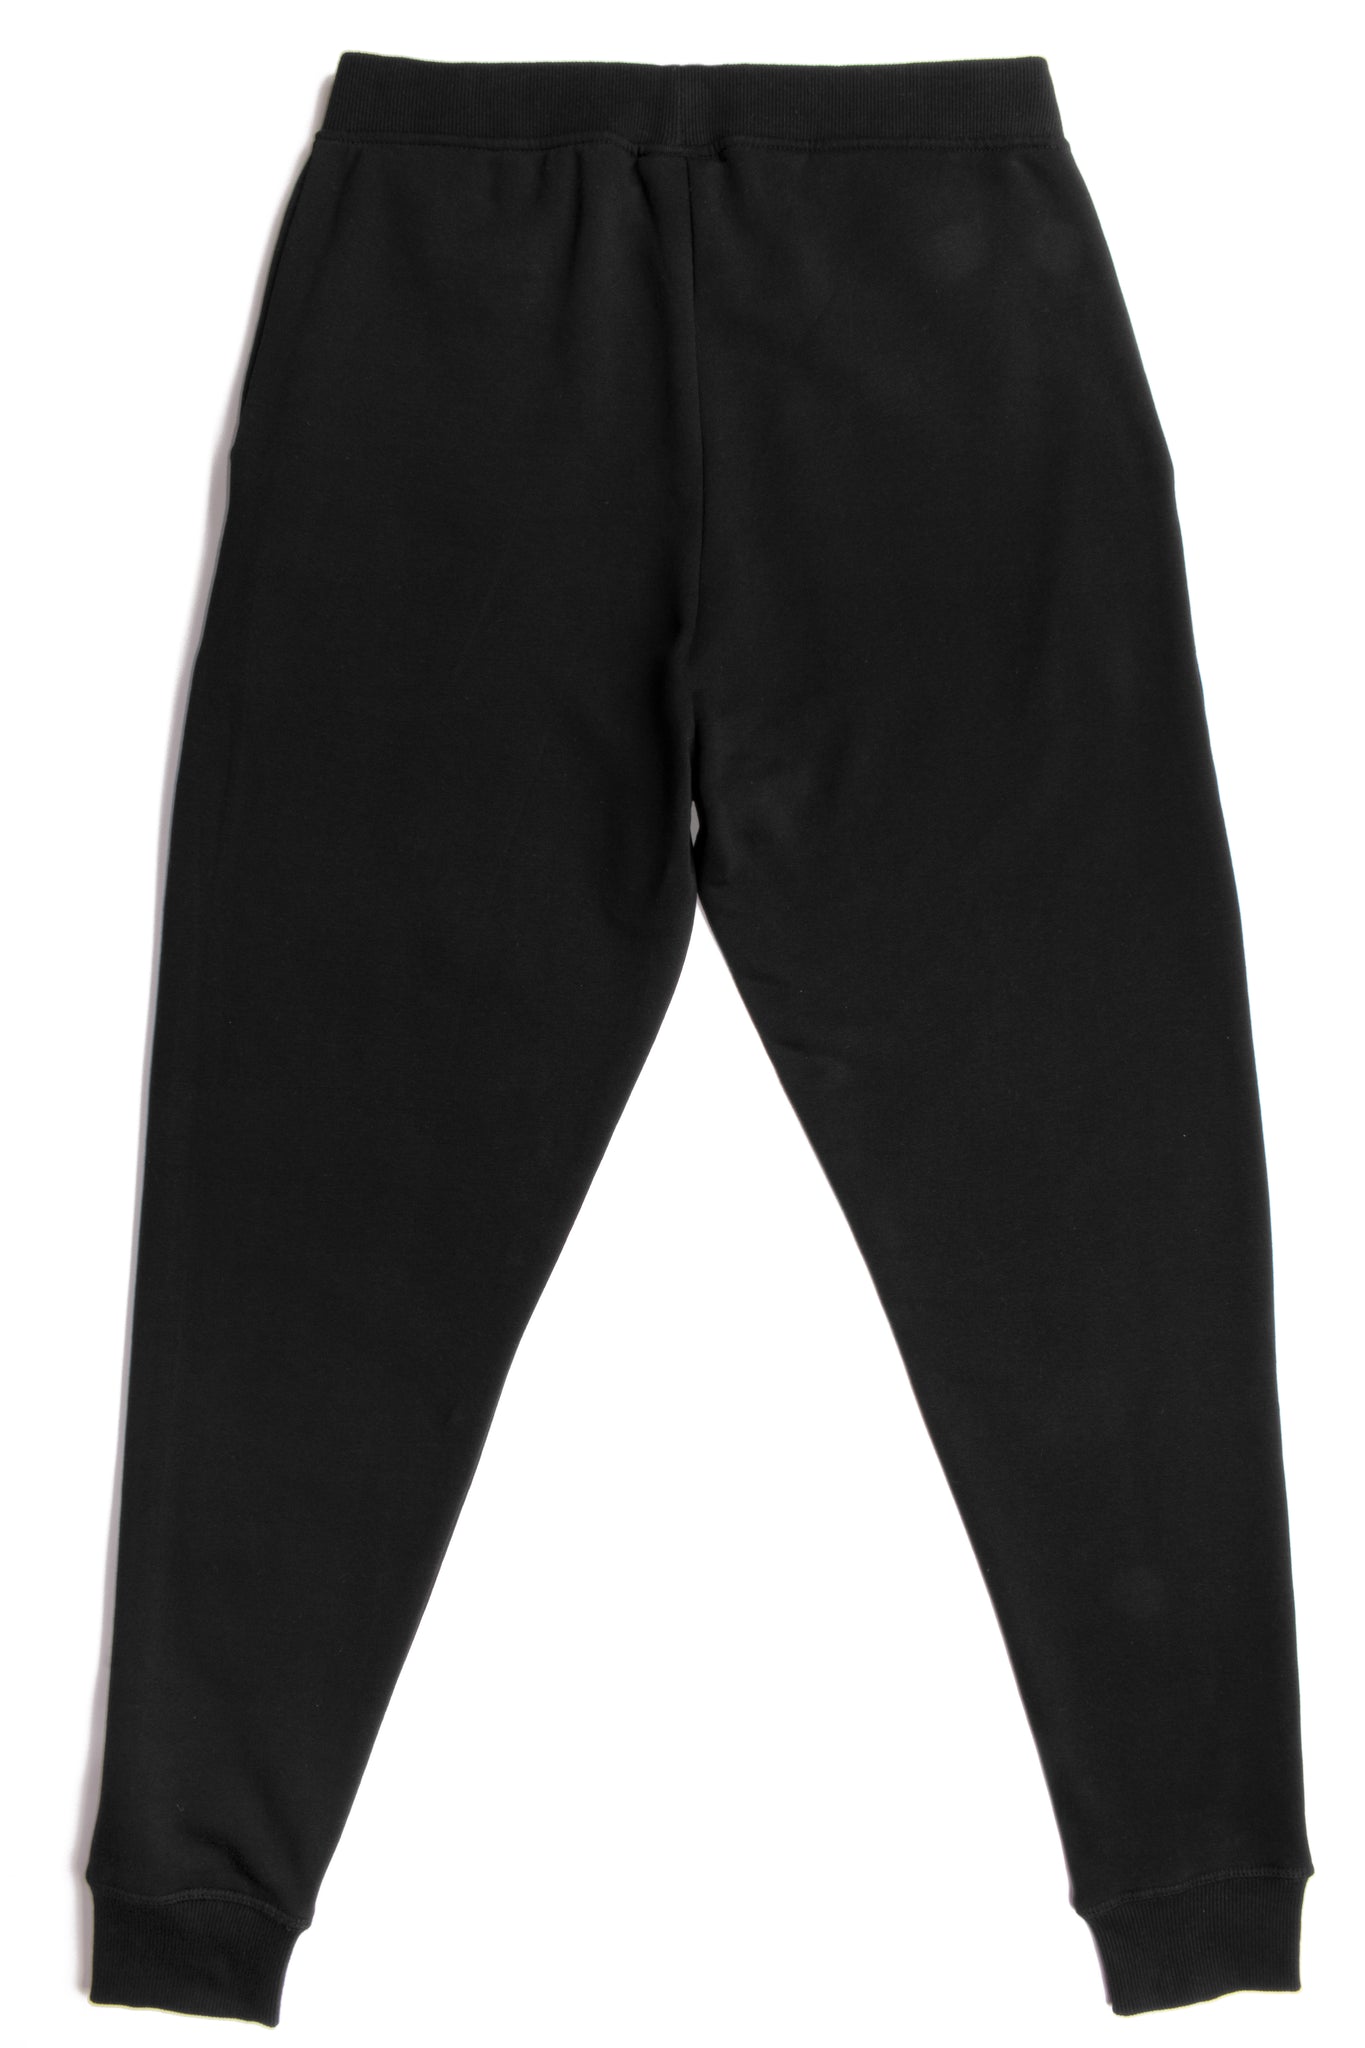 HERO-5020R Unisex Joggers - Black (Relaxed Fit) – Just Like Hero